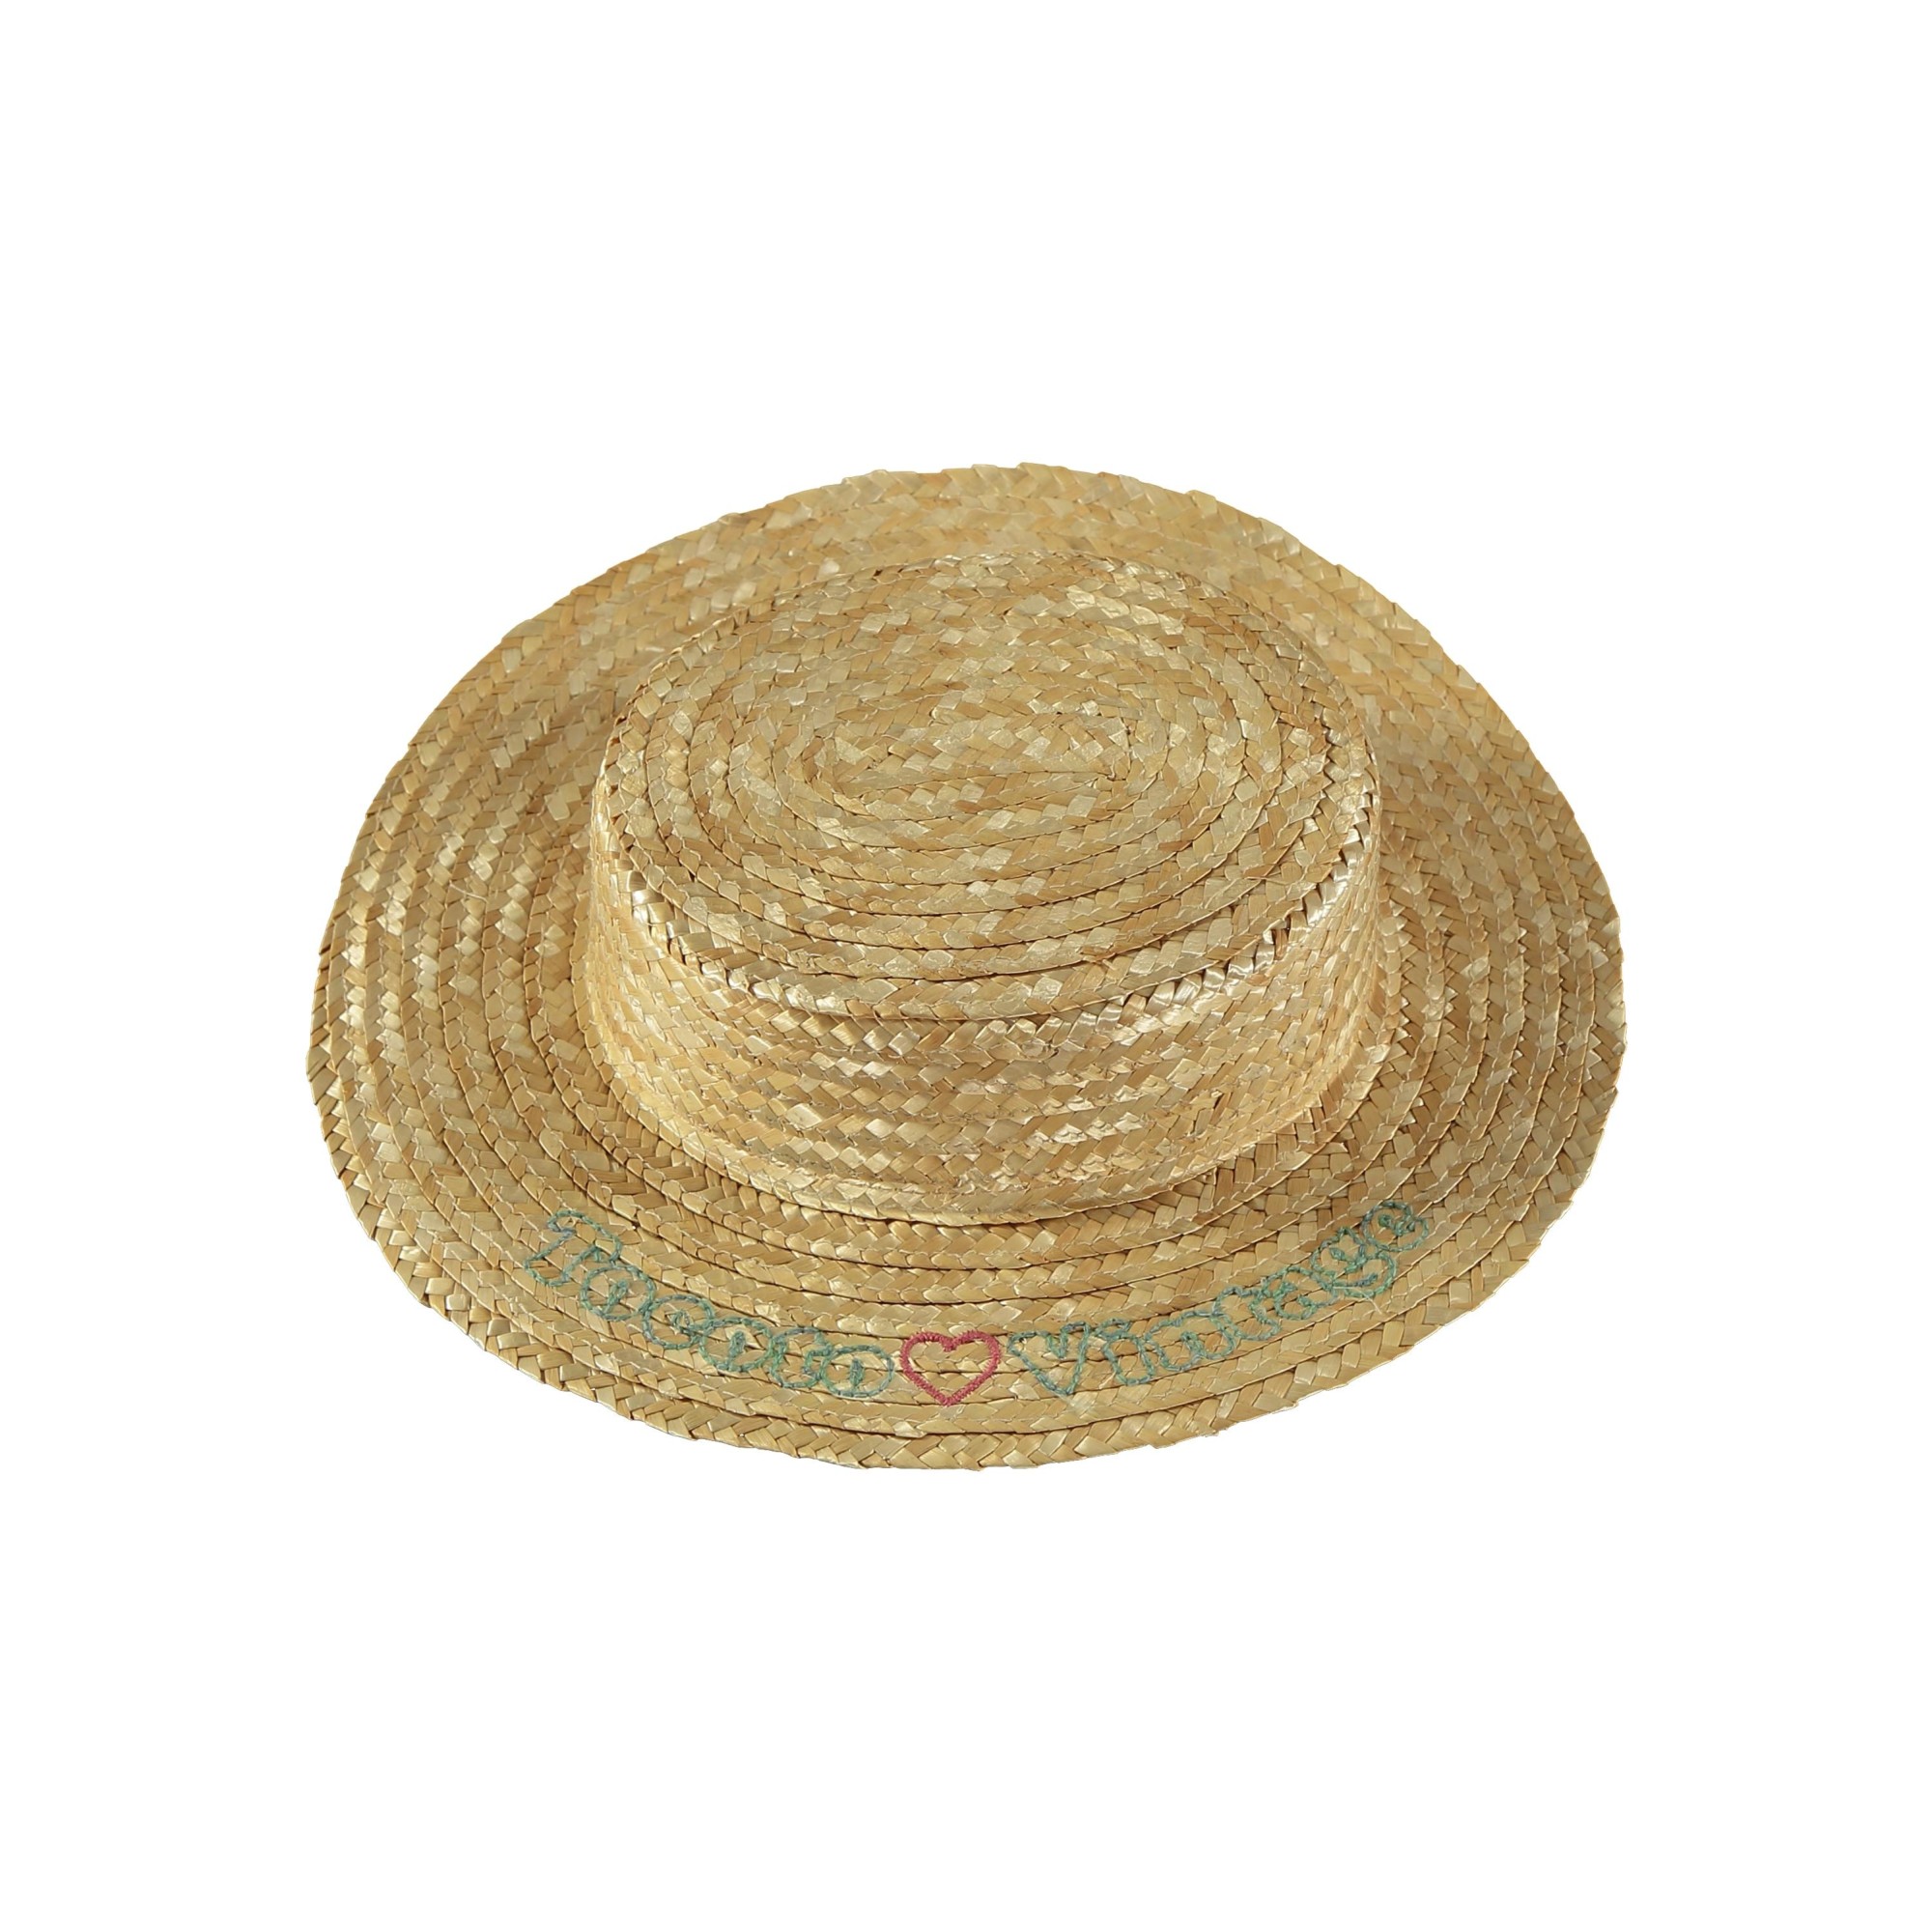 VINTAGE TOCOTO EMBROIDERED STRAW CANOTIER STYLE HAT